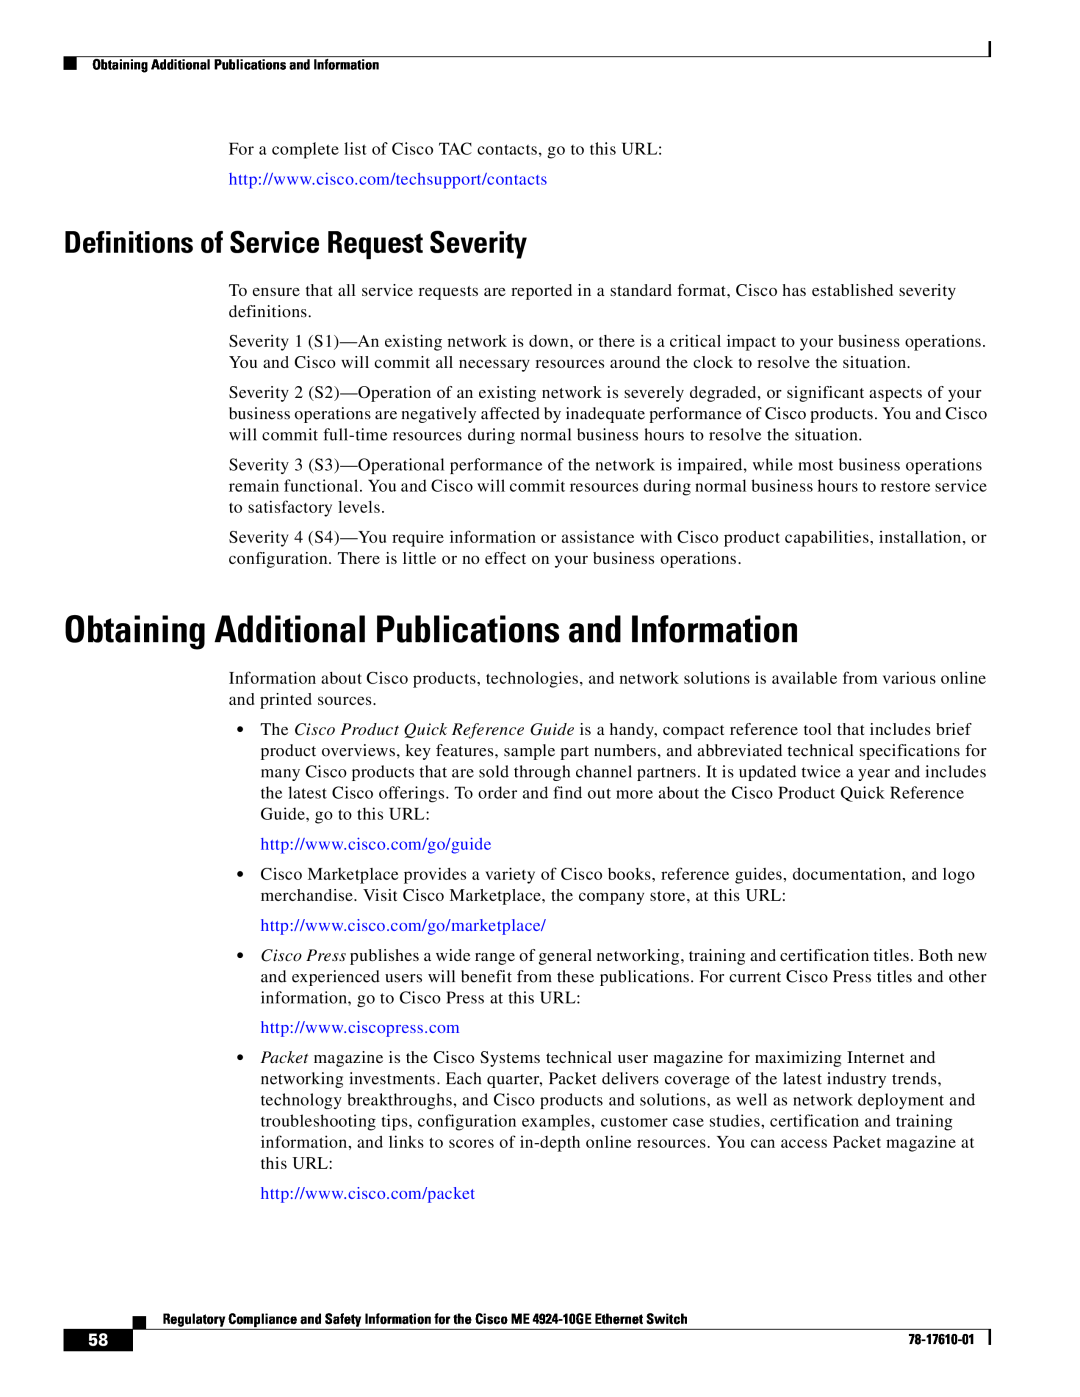 Cisco Systems ME 4924-10GE Obtaining Additional Publications and Information, Definitions of Service Request Severity 